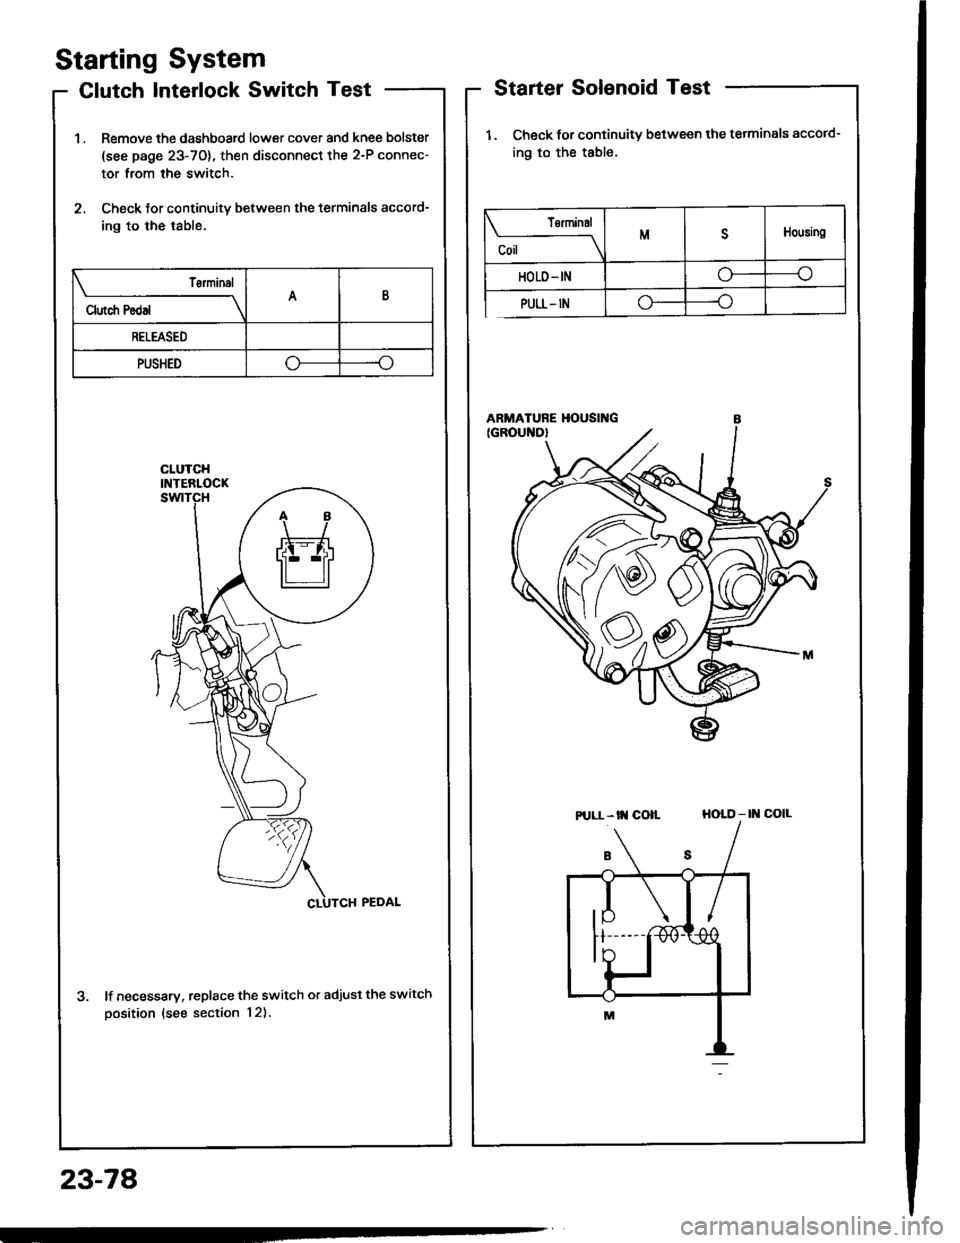 ACURA INTEGRA 1994  Service Service Manual Starting System
Clutch Interlock Switch Test
1 . Remove the dashboard lower cover and knee bolster
(see page 23-70), then disconnect the 2-P connec-
tor from the switch.
2. Check tor continuity betwee